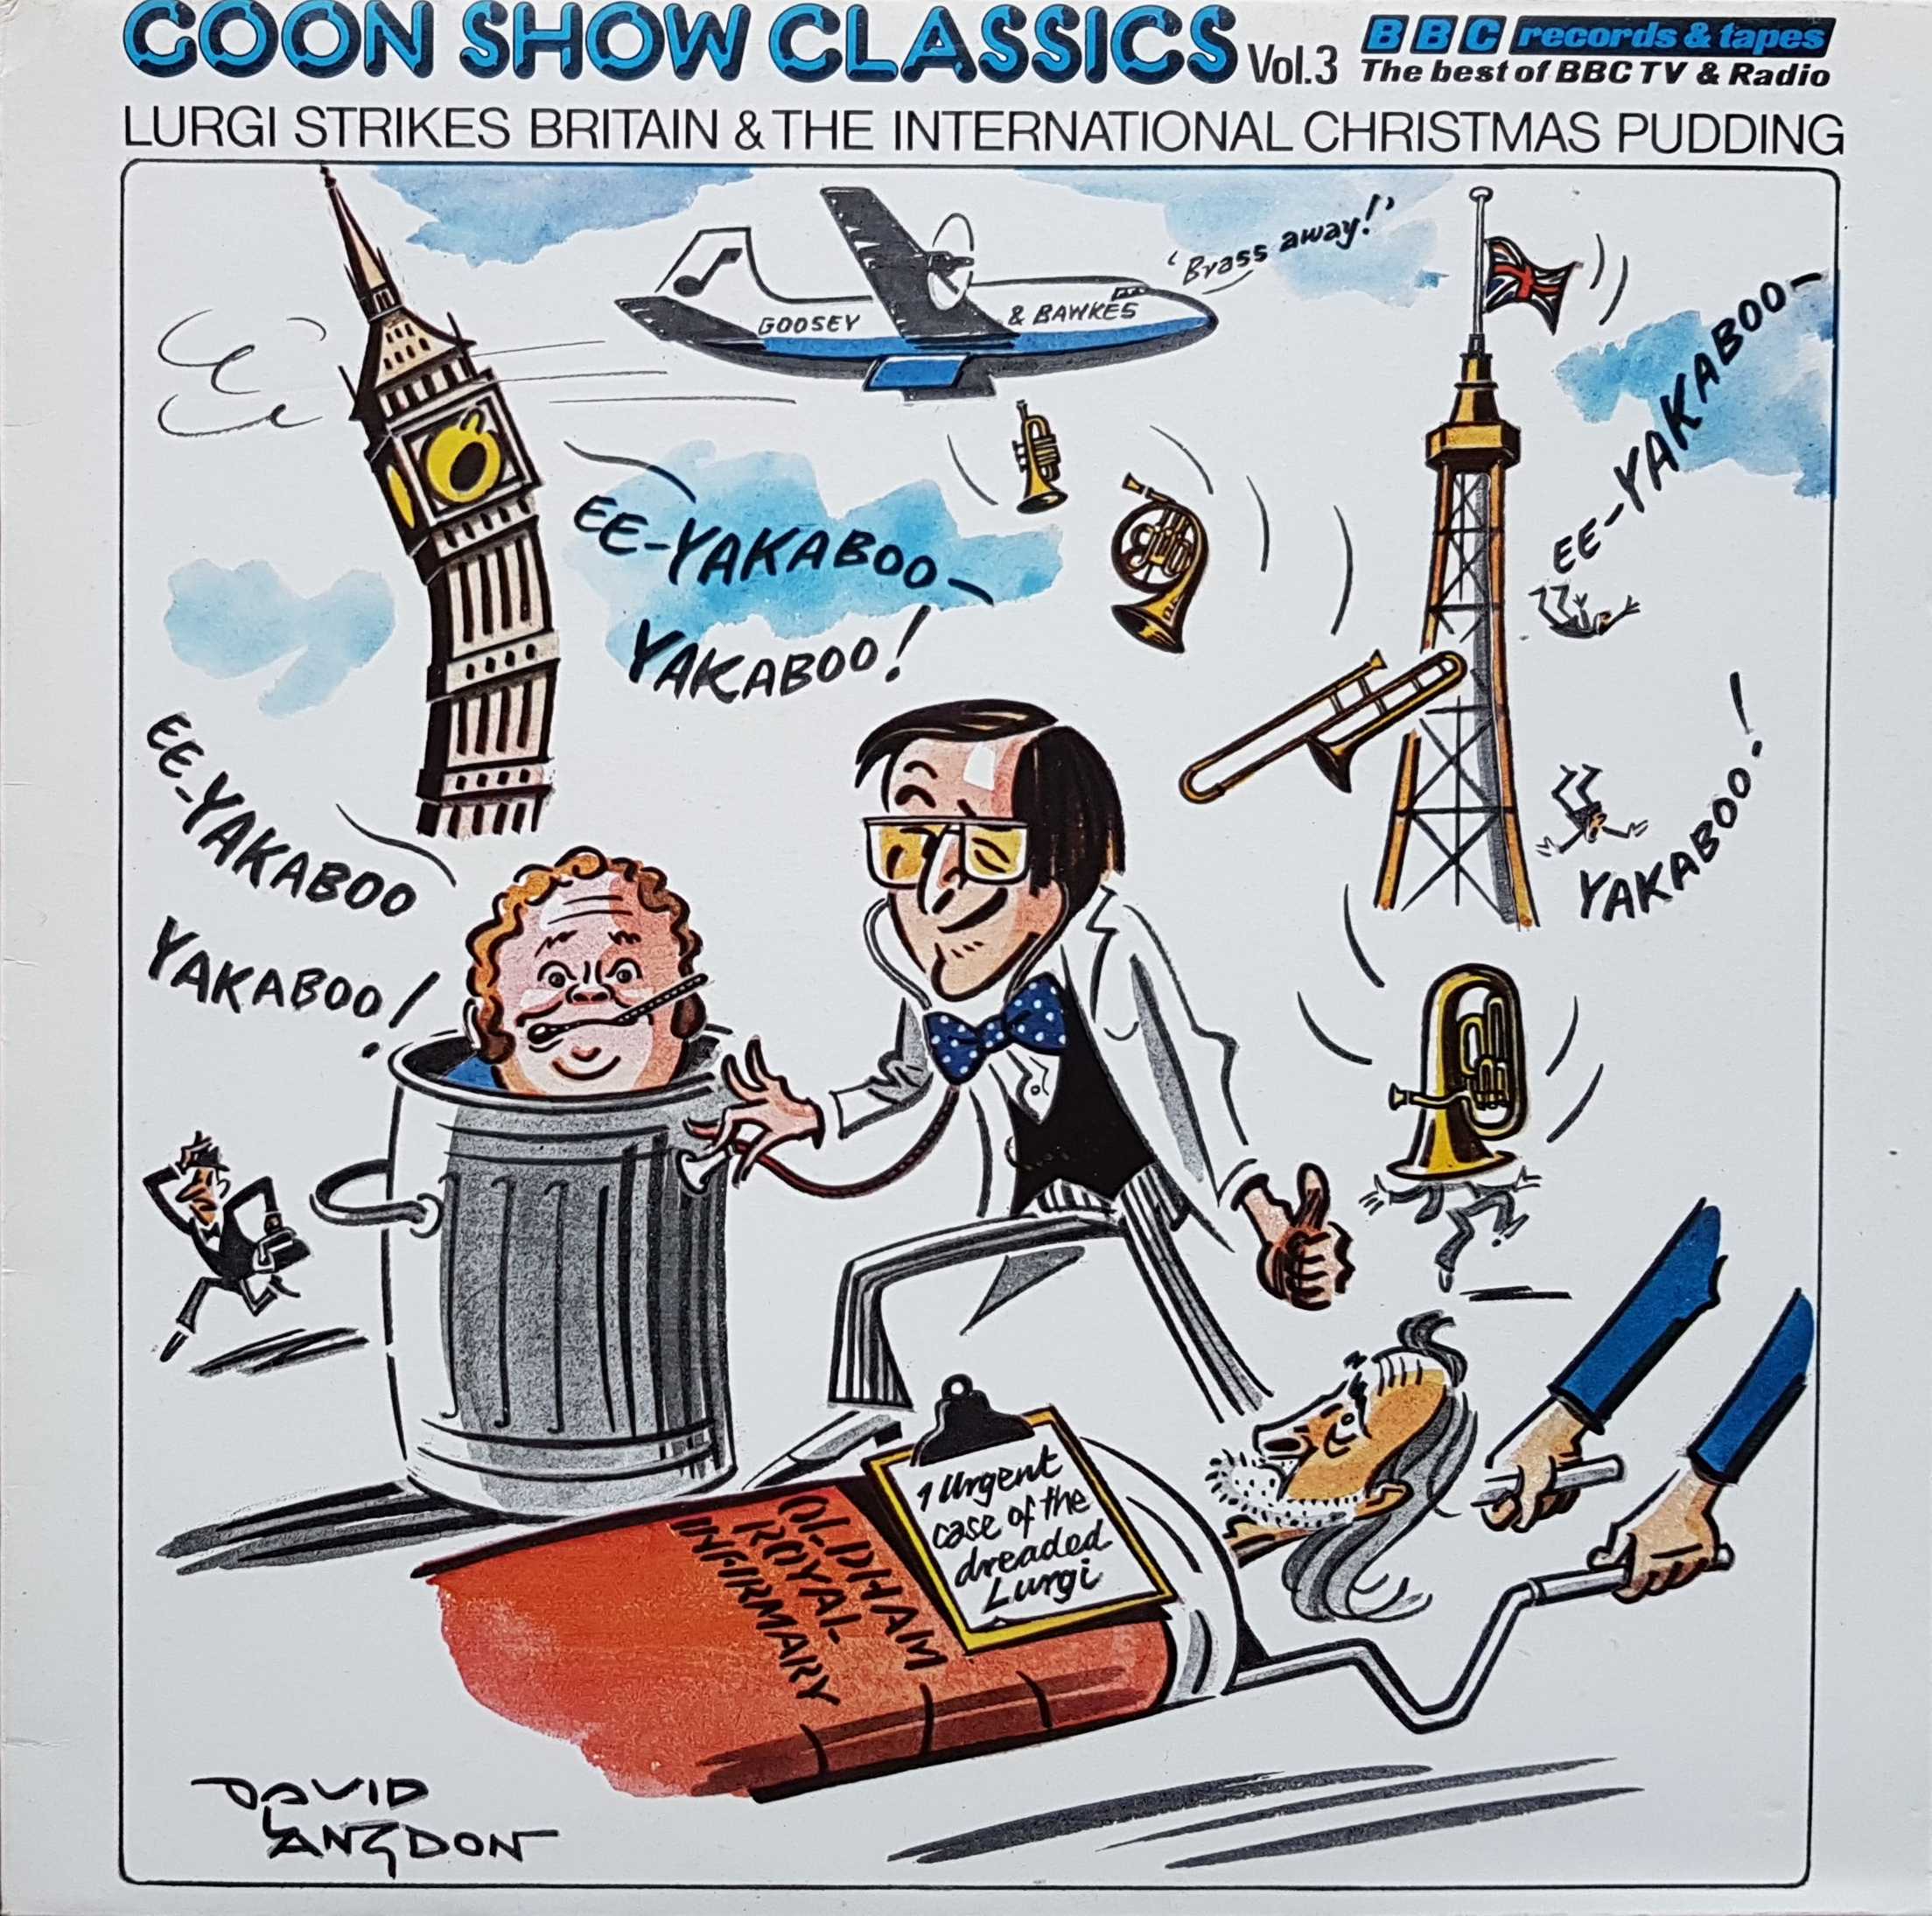 Picture of REB 246 Goon show classics - Volume 3 by artist Eric Sykes / Spike Milligan from the BBC records and Tapes library